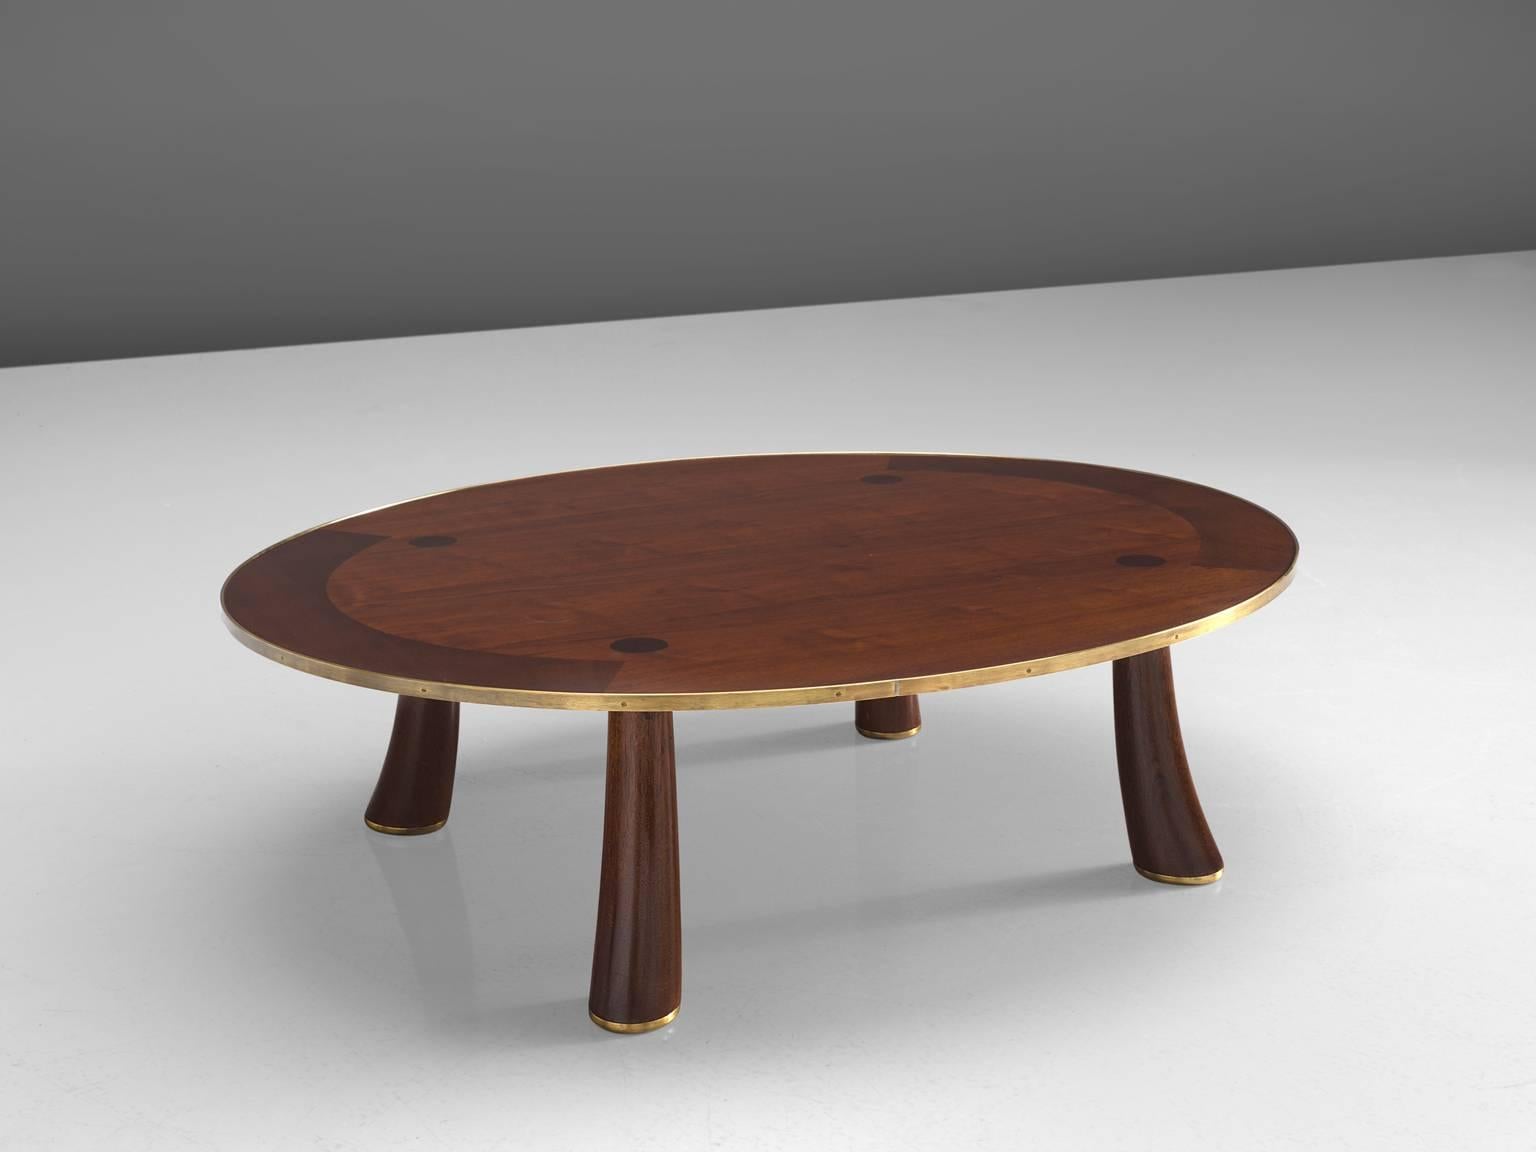 Dunbar coffee table, rosewood, brass, United States, 1950s

This oval coffee table is executed in the finest rosewood and shows delicate, crafted details in the slightly bent organic legs. The rim of the table is finished with brass and the legs